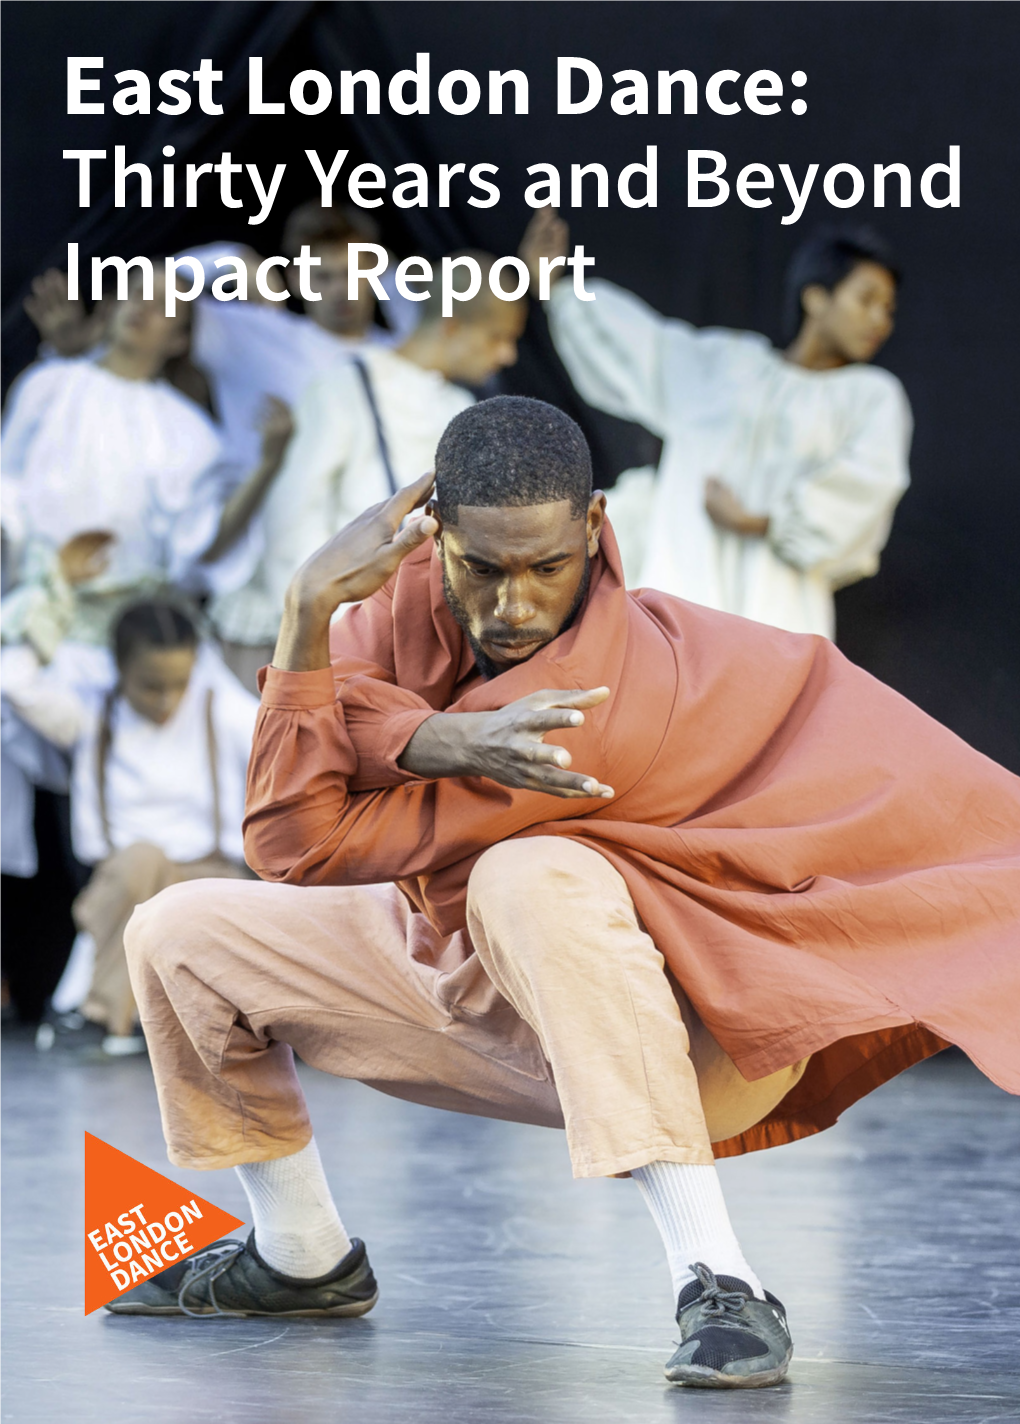 Thirty Years and Beyond Impact Report